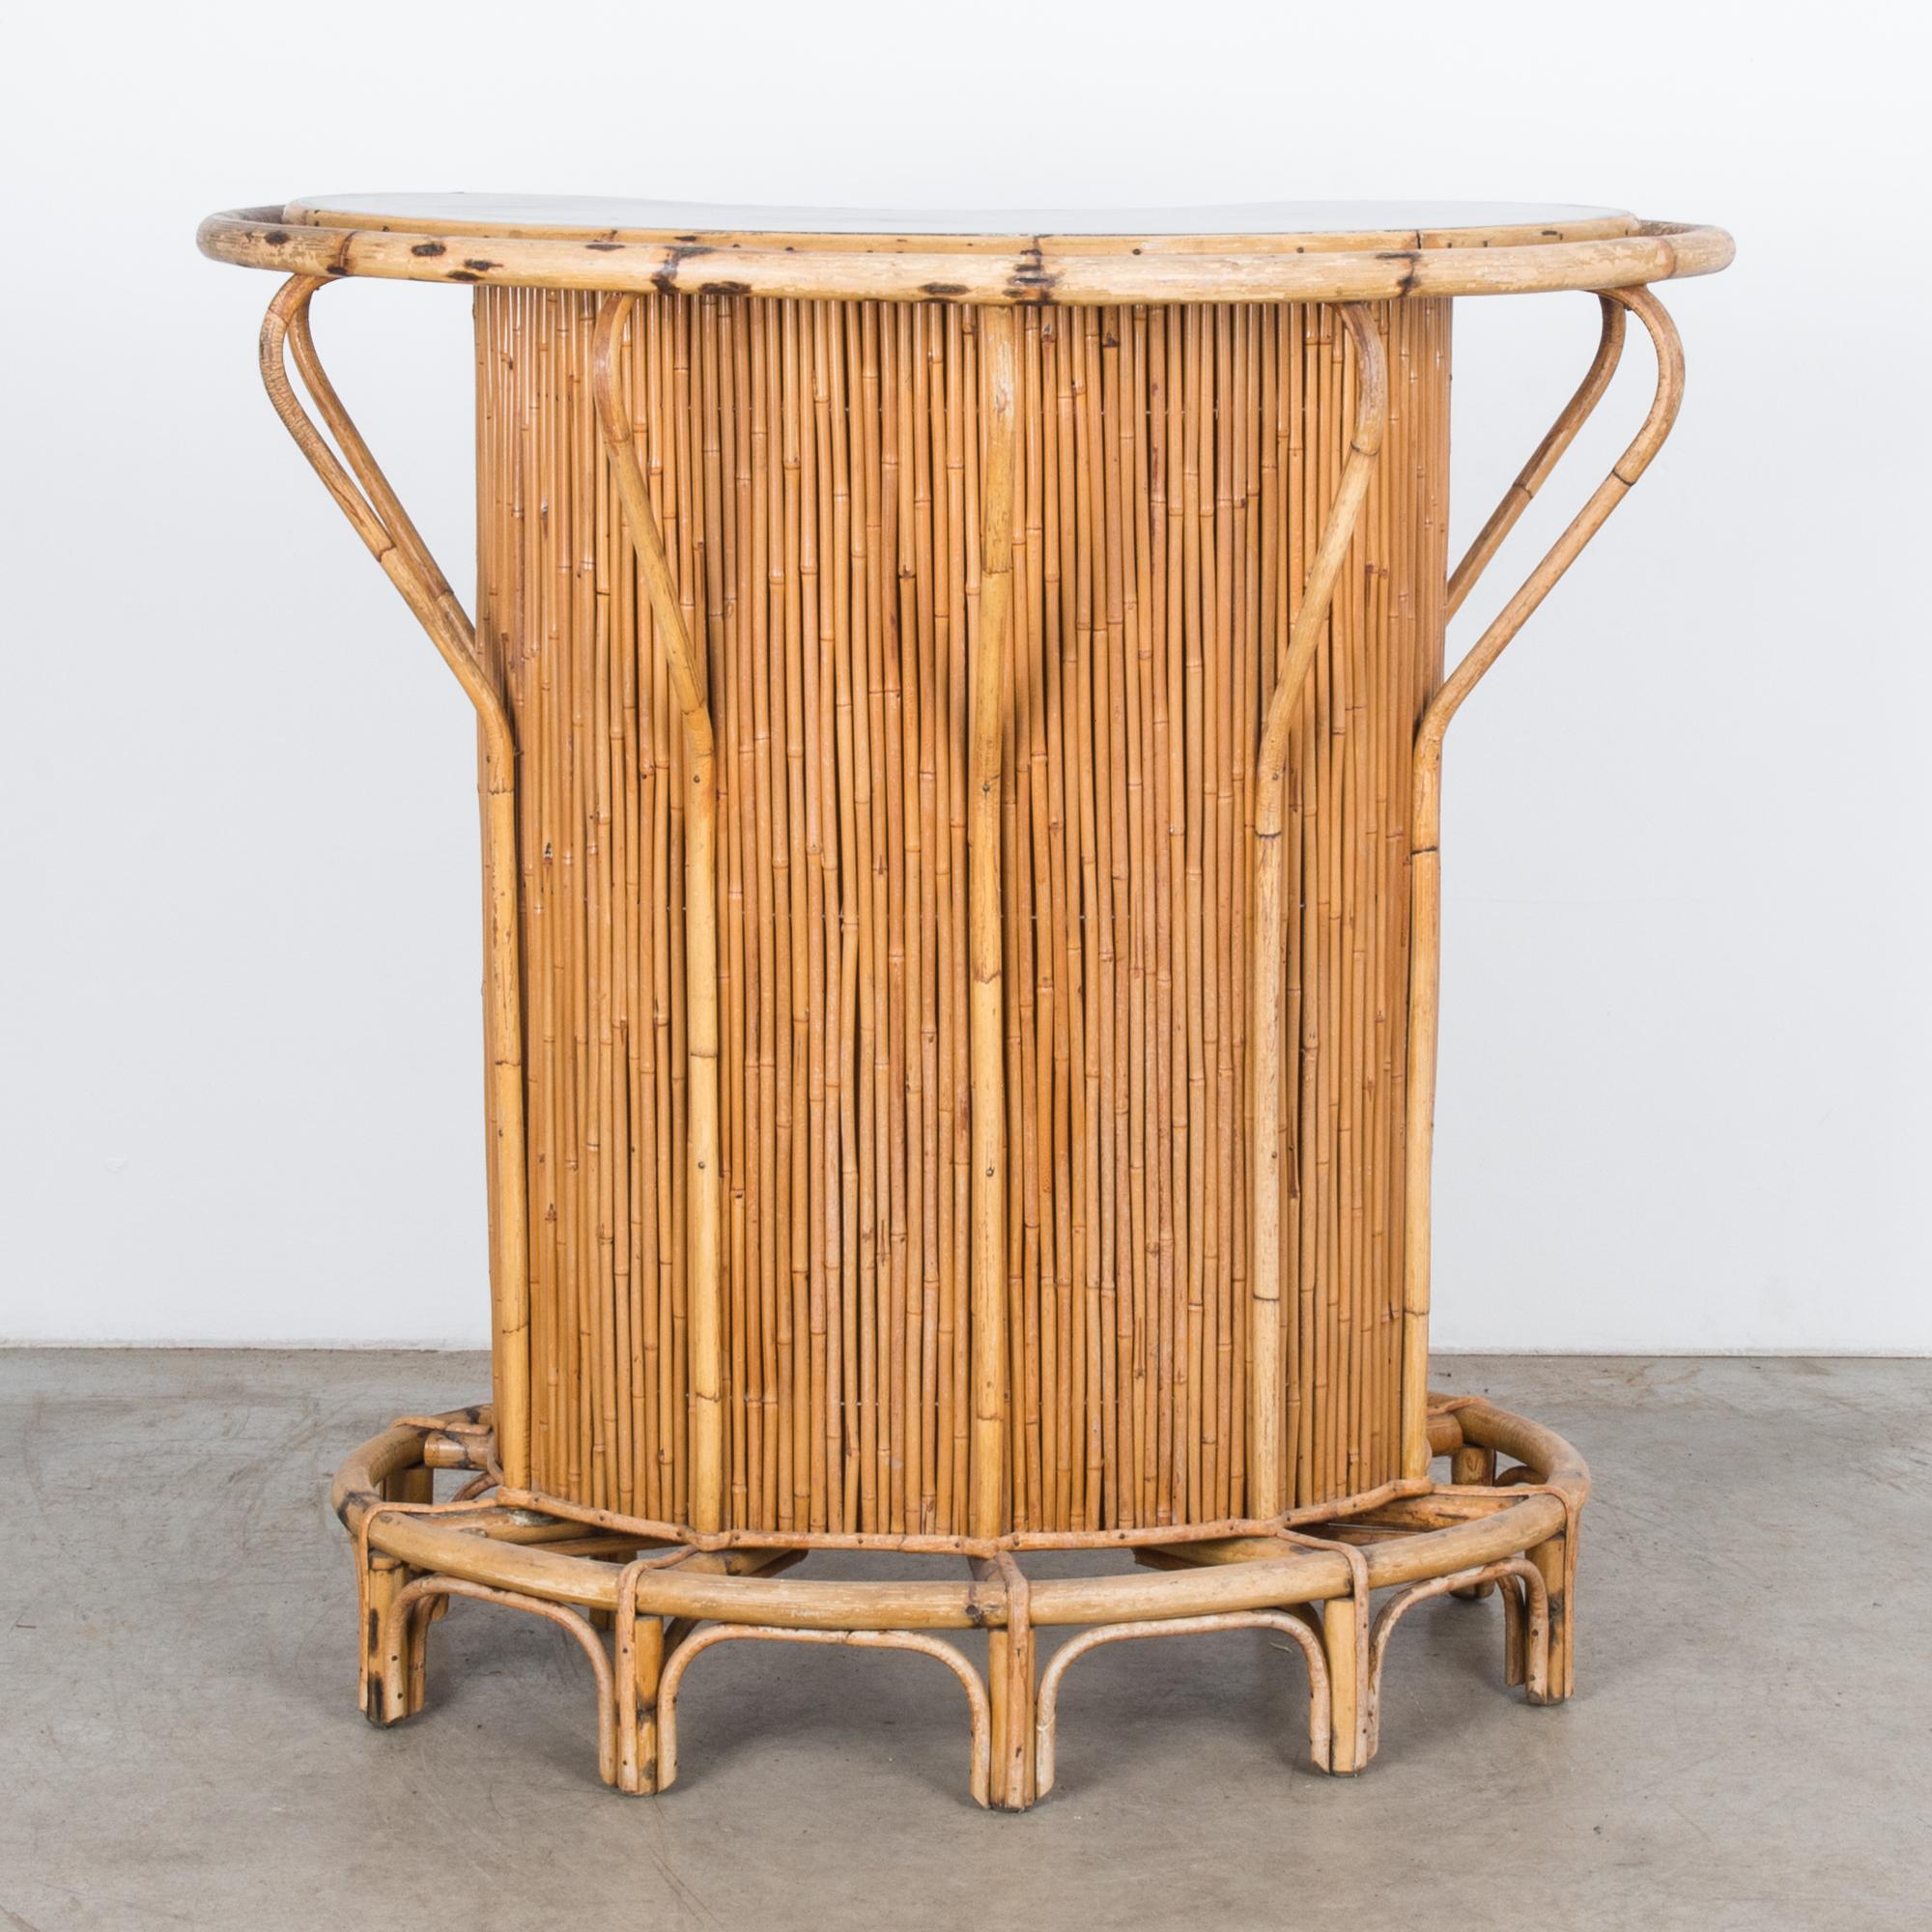 This dry bar was made in France, circa 1960 from bamboo. The curved arms and circular platform accentuate the distinctive bean shape construction, which houses three shelves painted black.